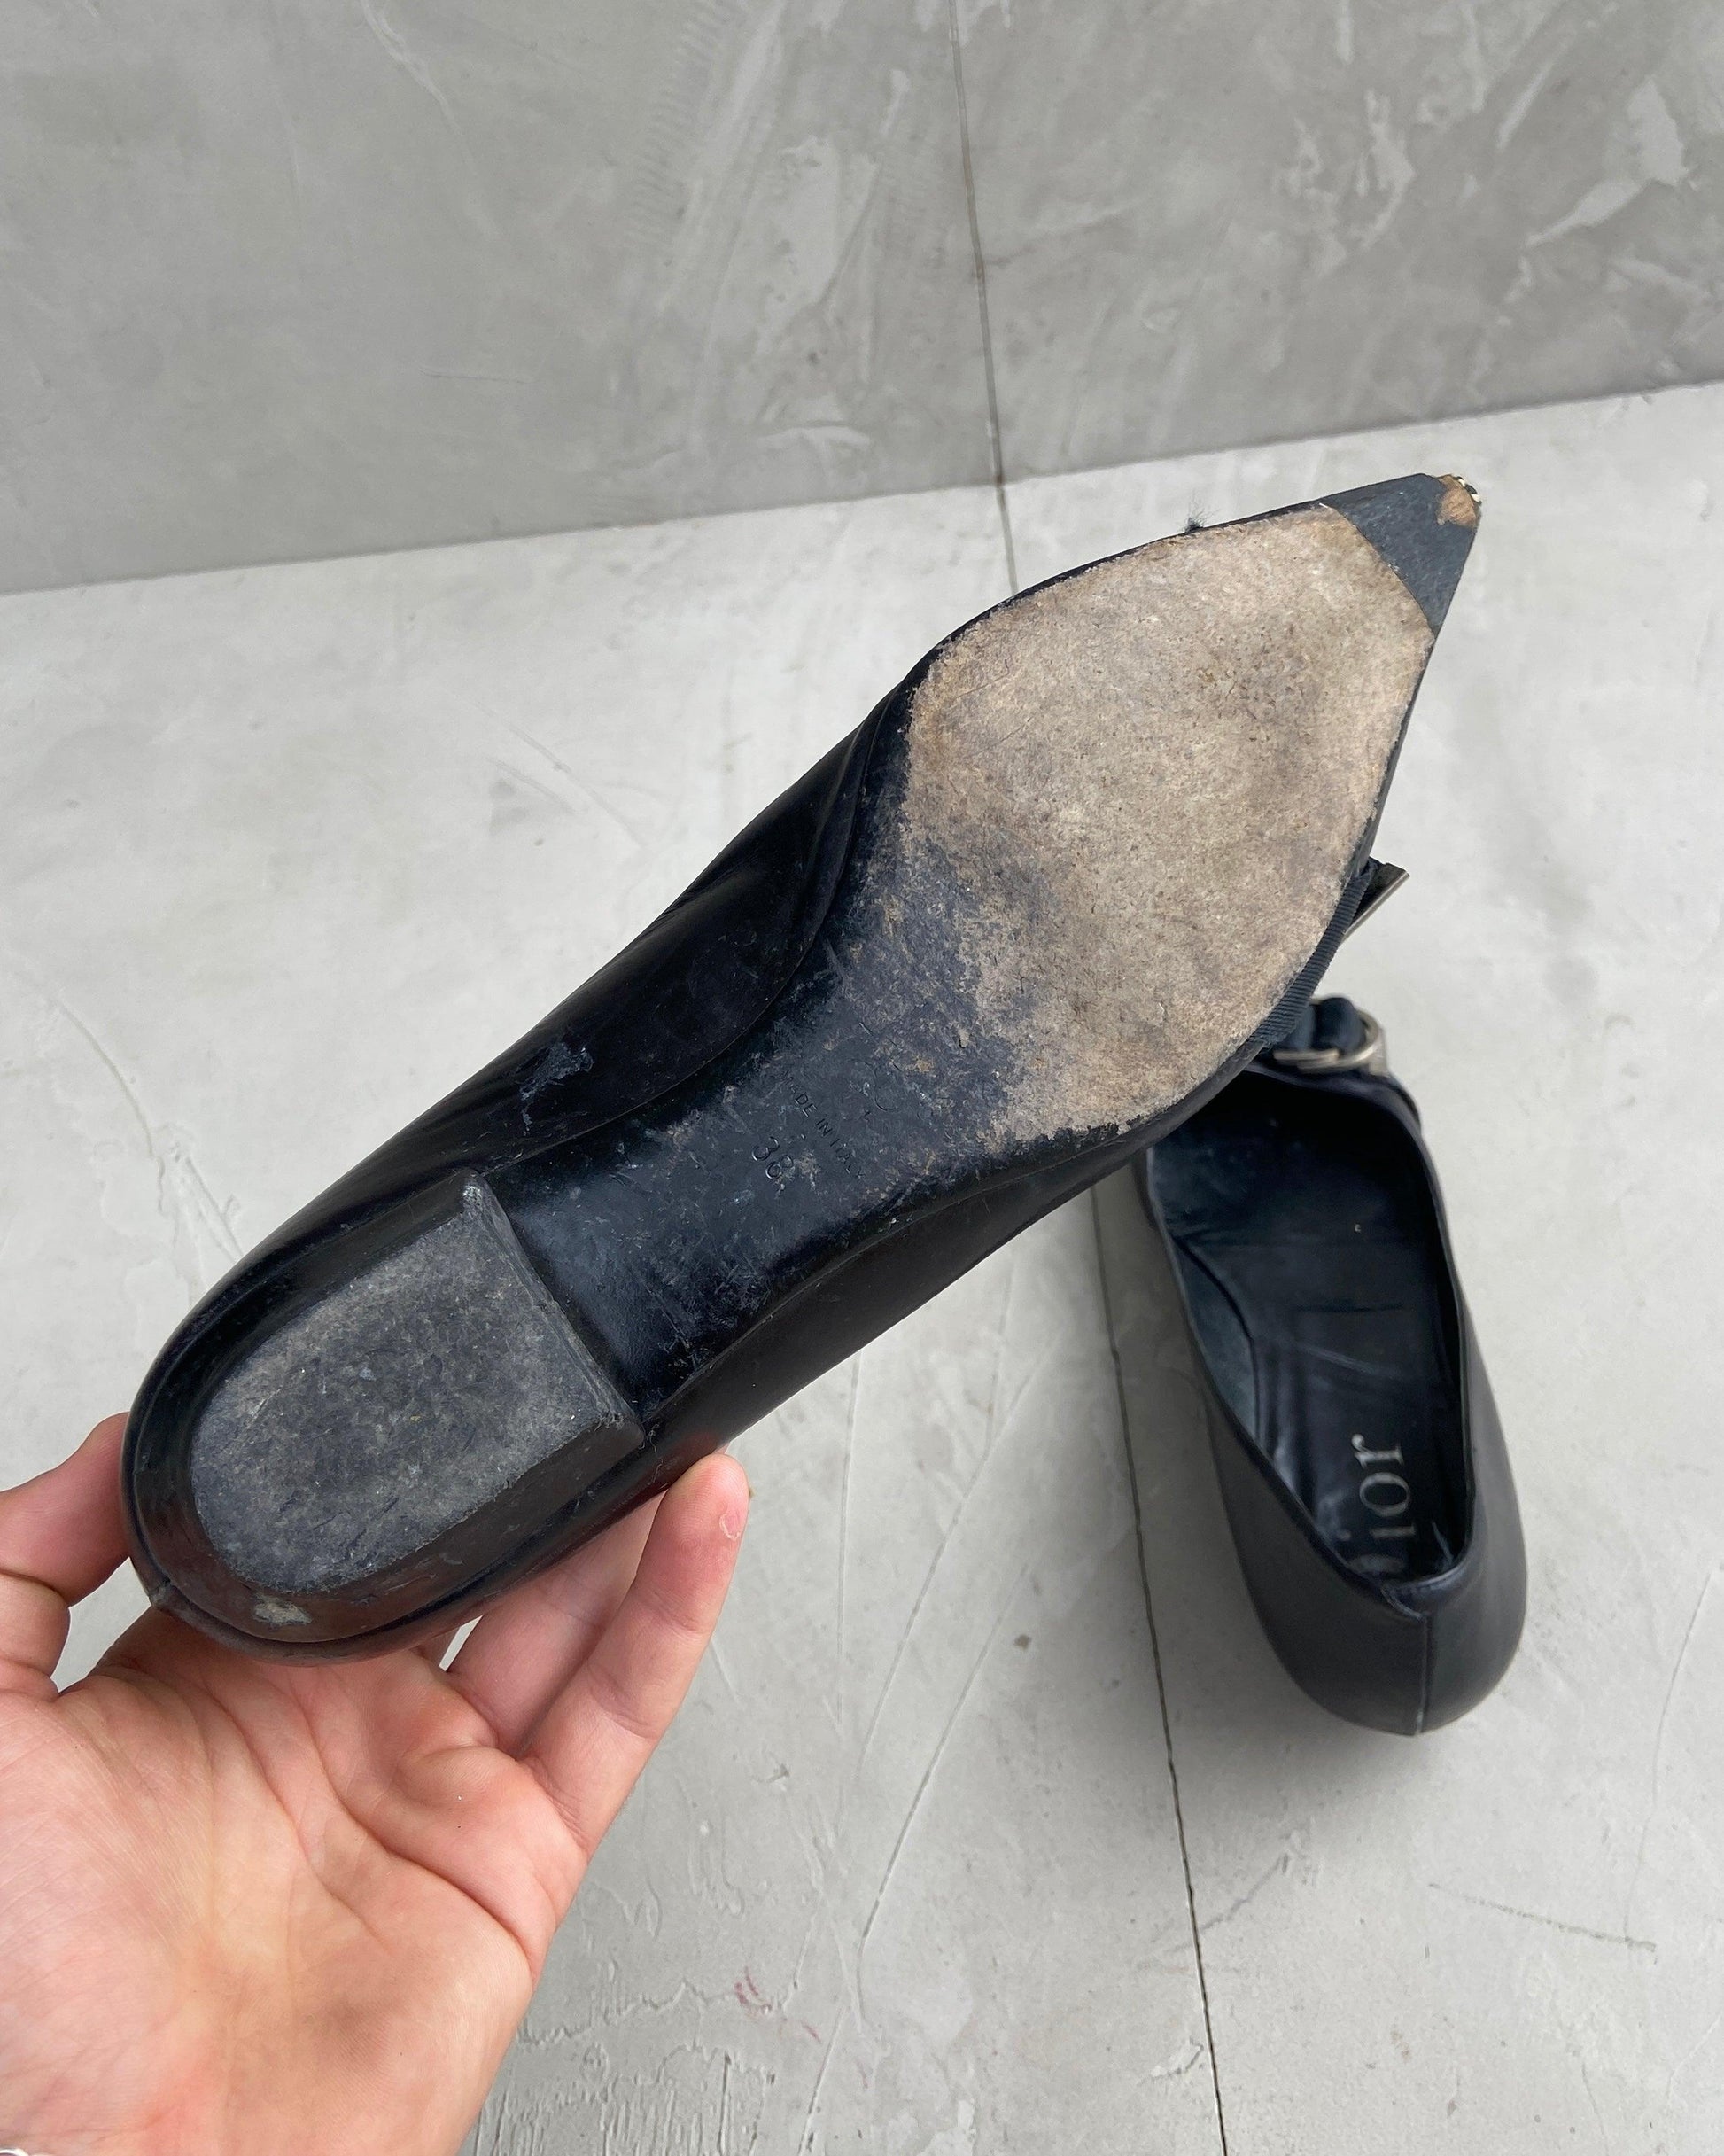 CHRISTIAN DIOR 'D' LEATHER FLATS - EU 38 / UK 5 - Known Source